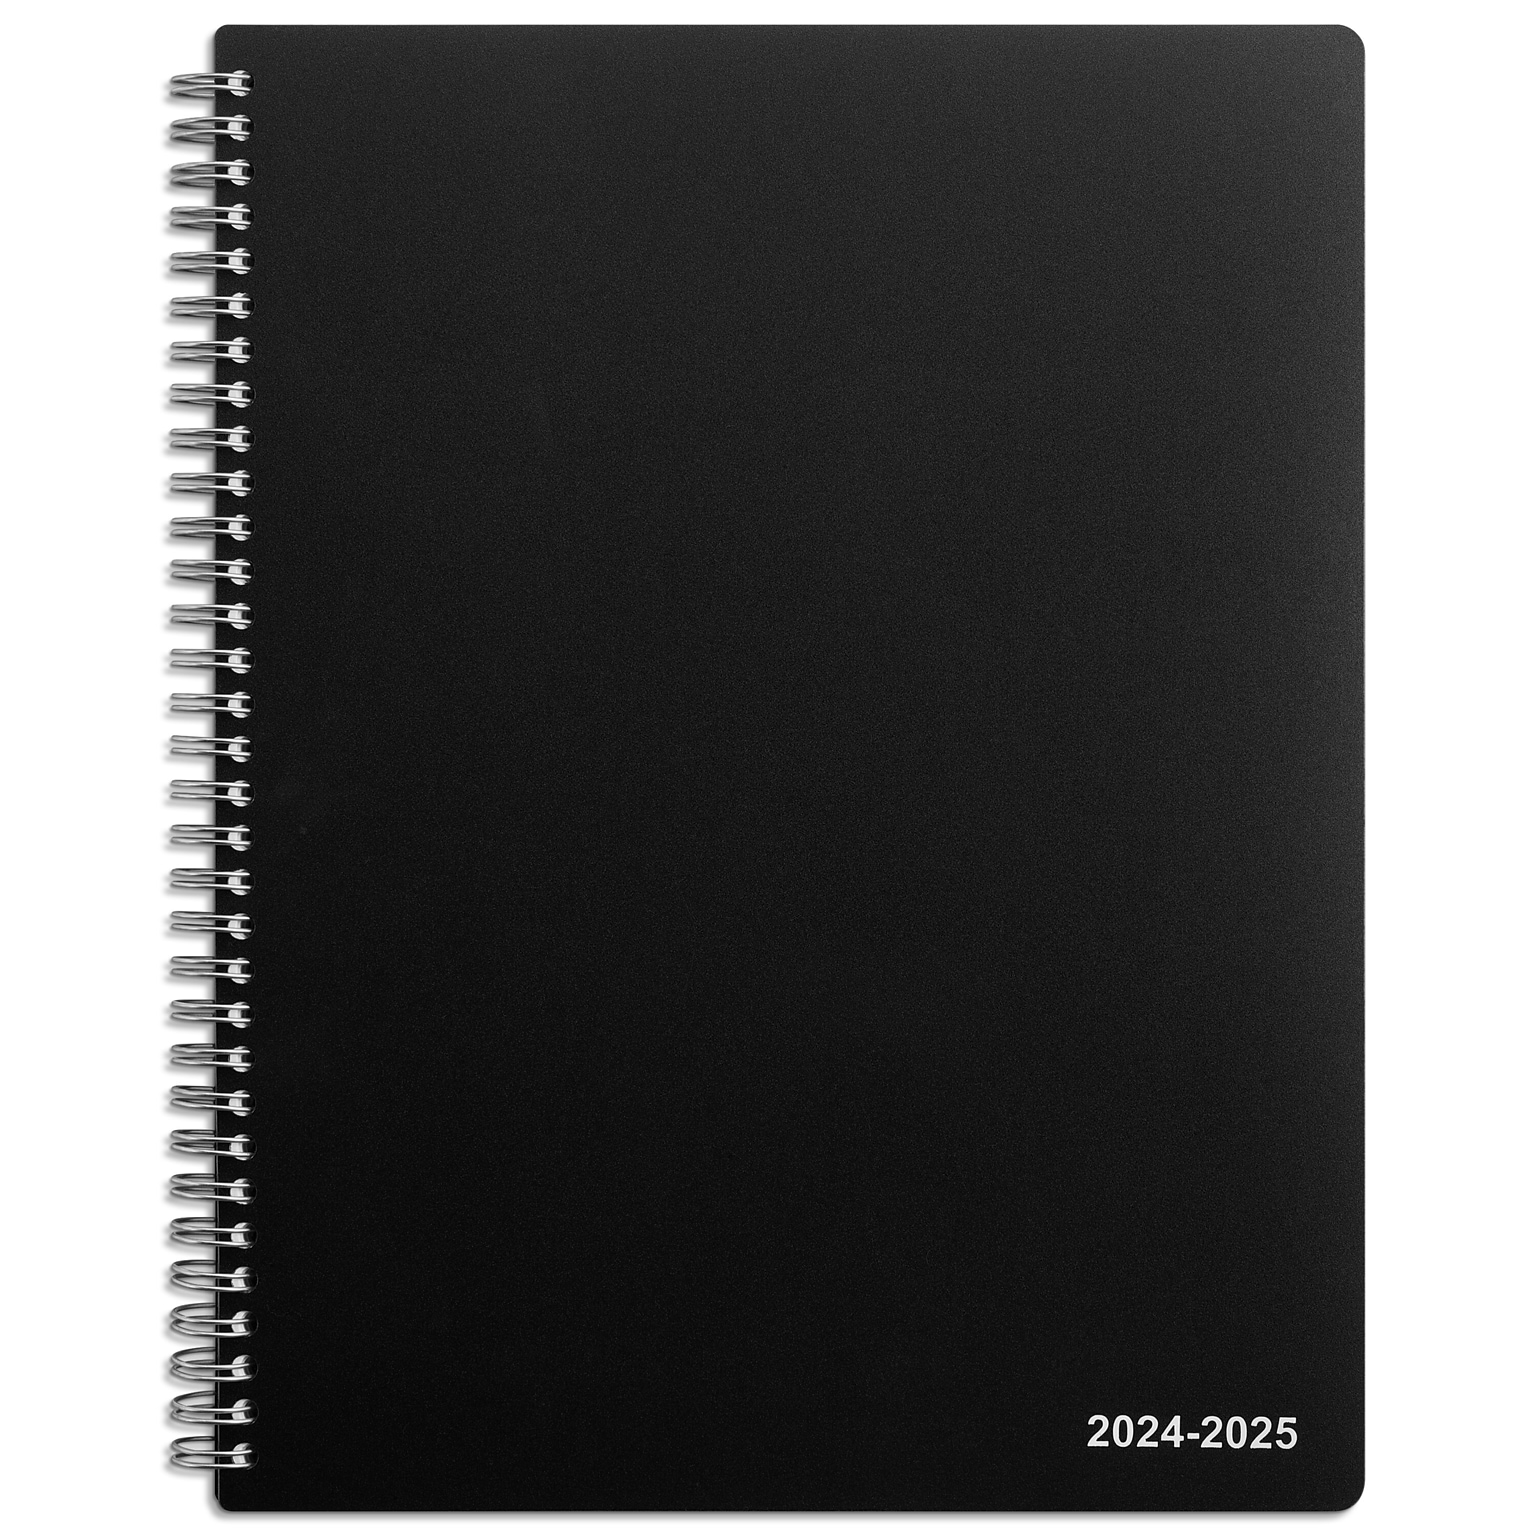 2024-2025 Staples 8 x 11 Academic Weekly & Monthly Appointment Book, Plastic Cover, Black (ST25499-23)